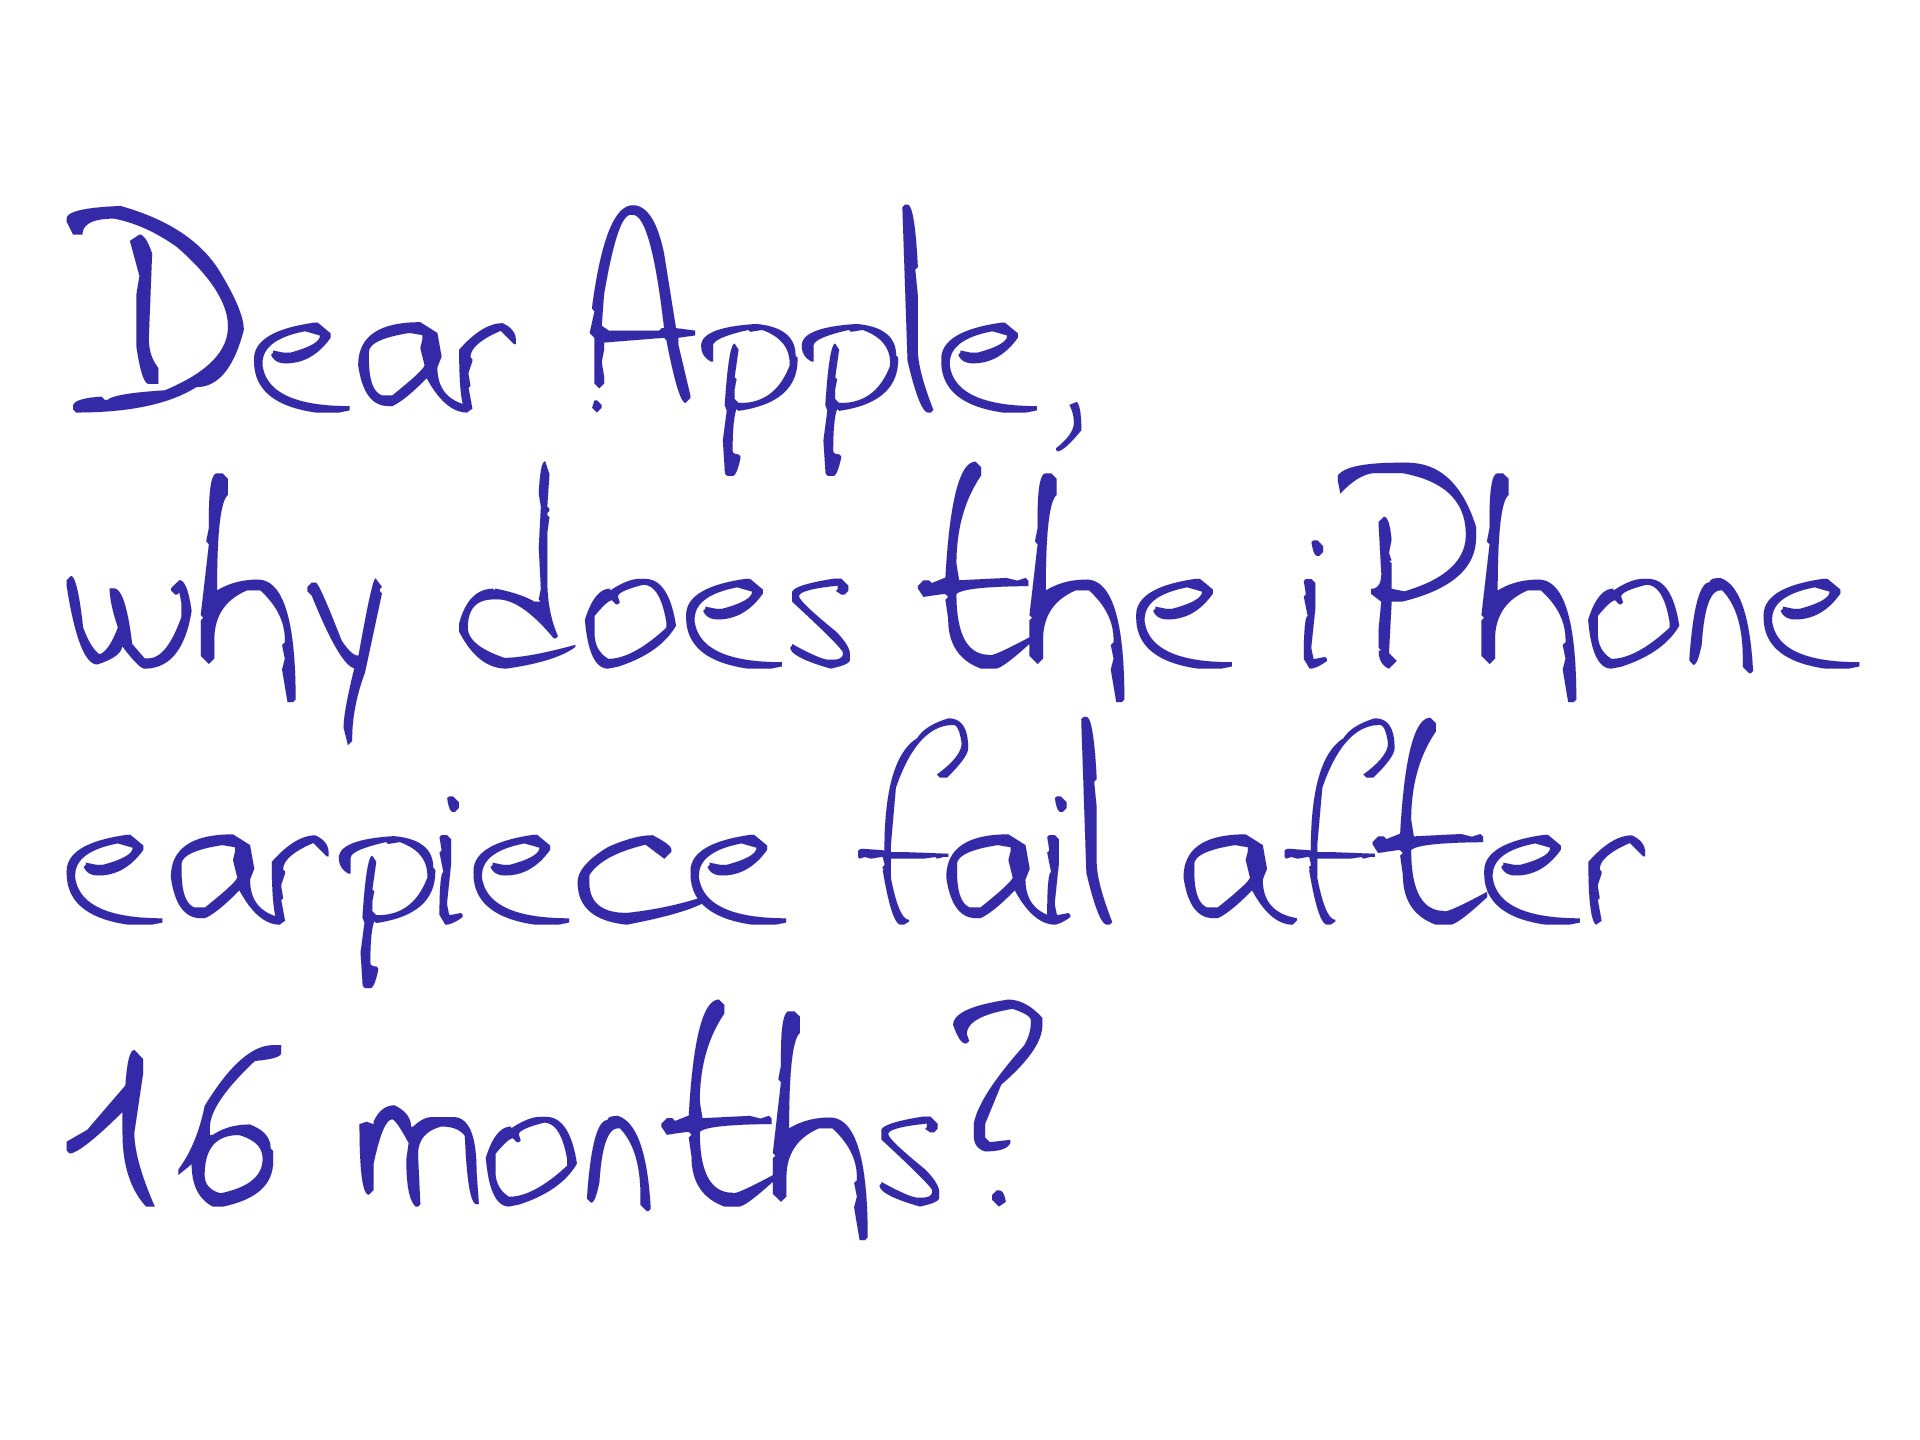 Dear Apple, why does the iPhone earpiece fail after 16 months?